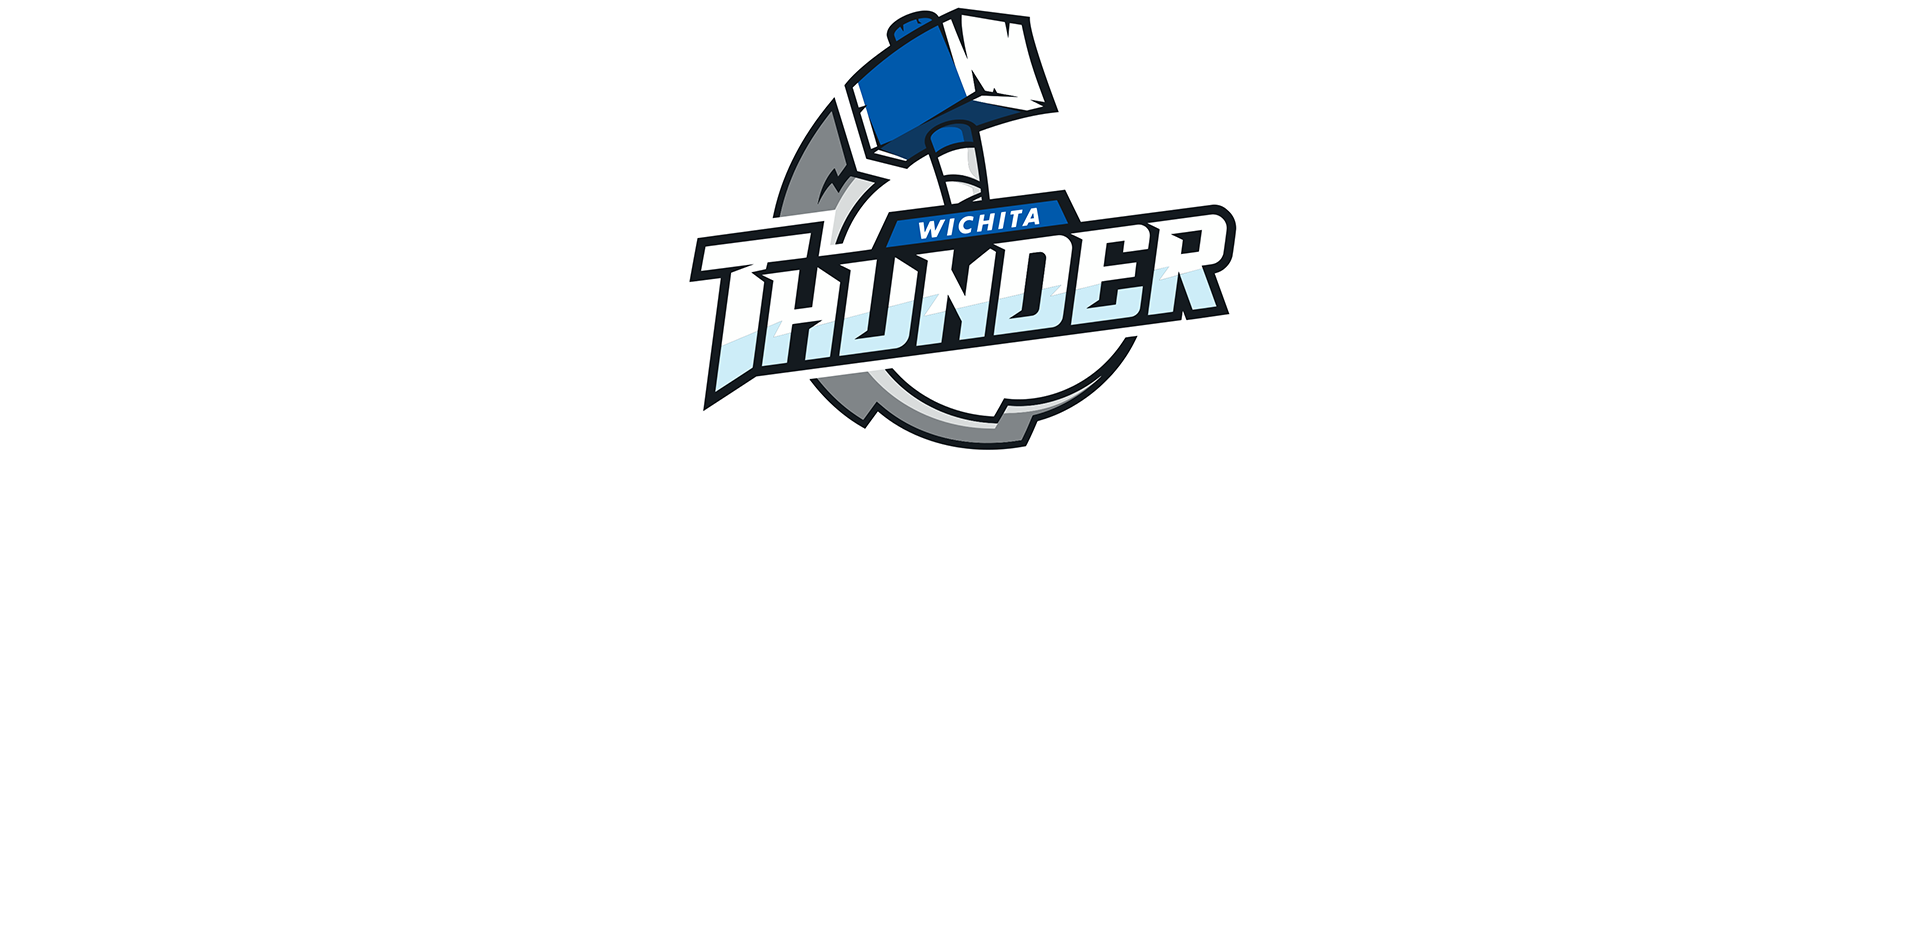 Wichita Thunder Faith & Family Night with Postgame Featuring Comedian Michael Jr.